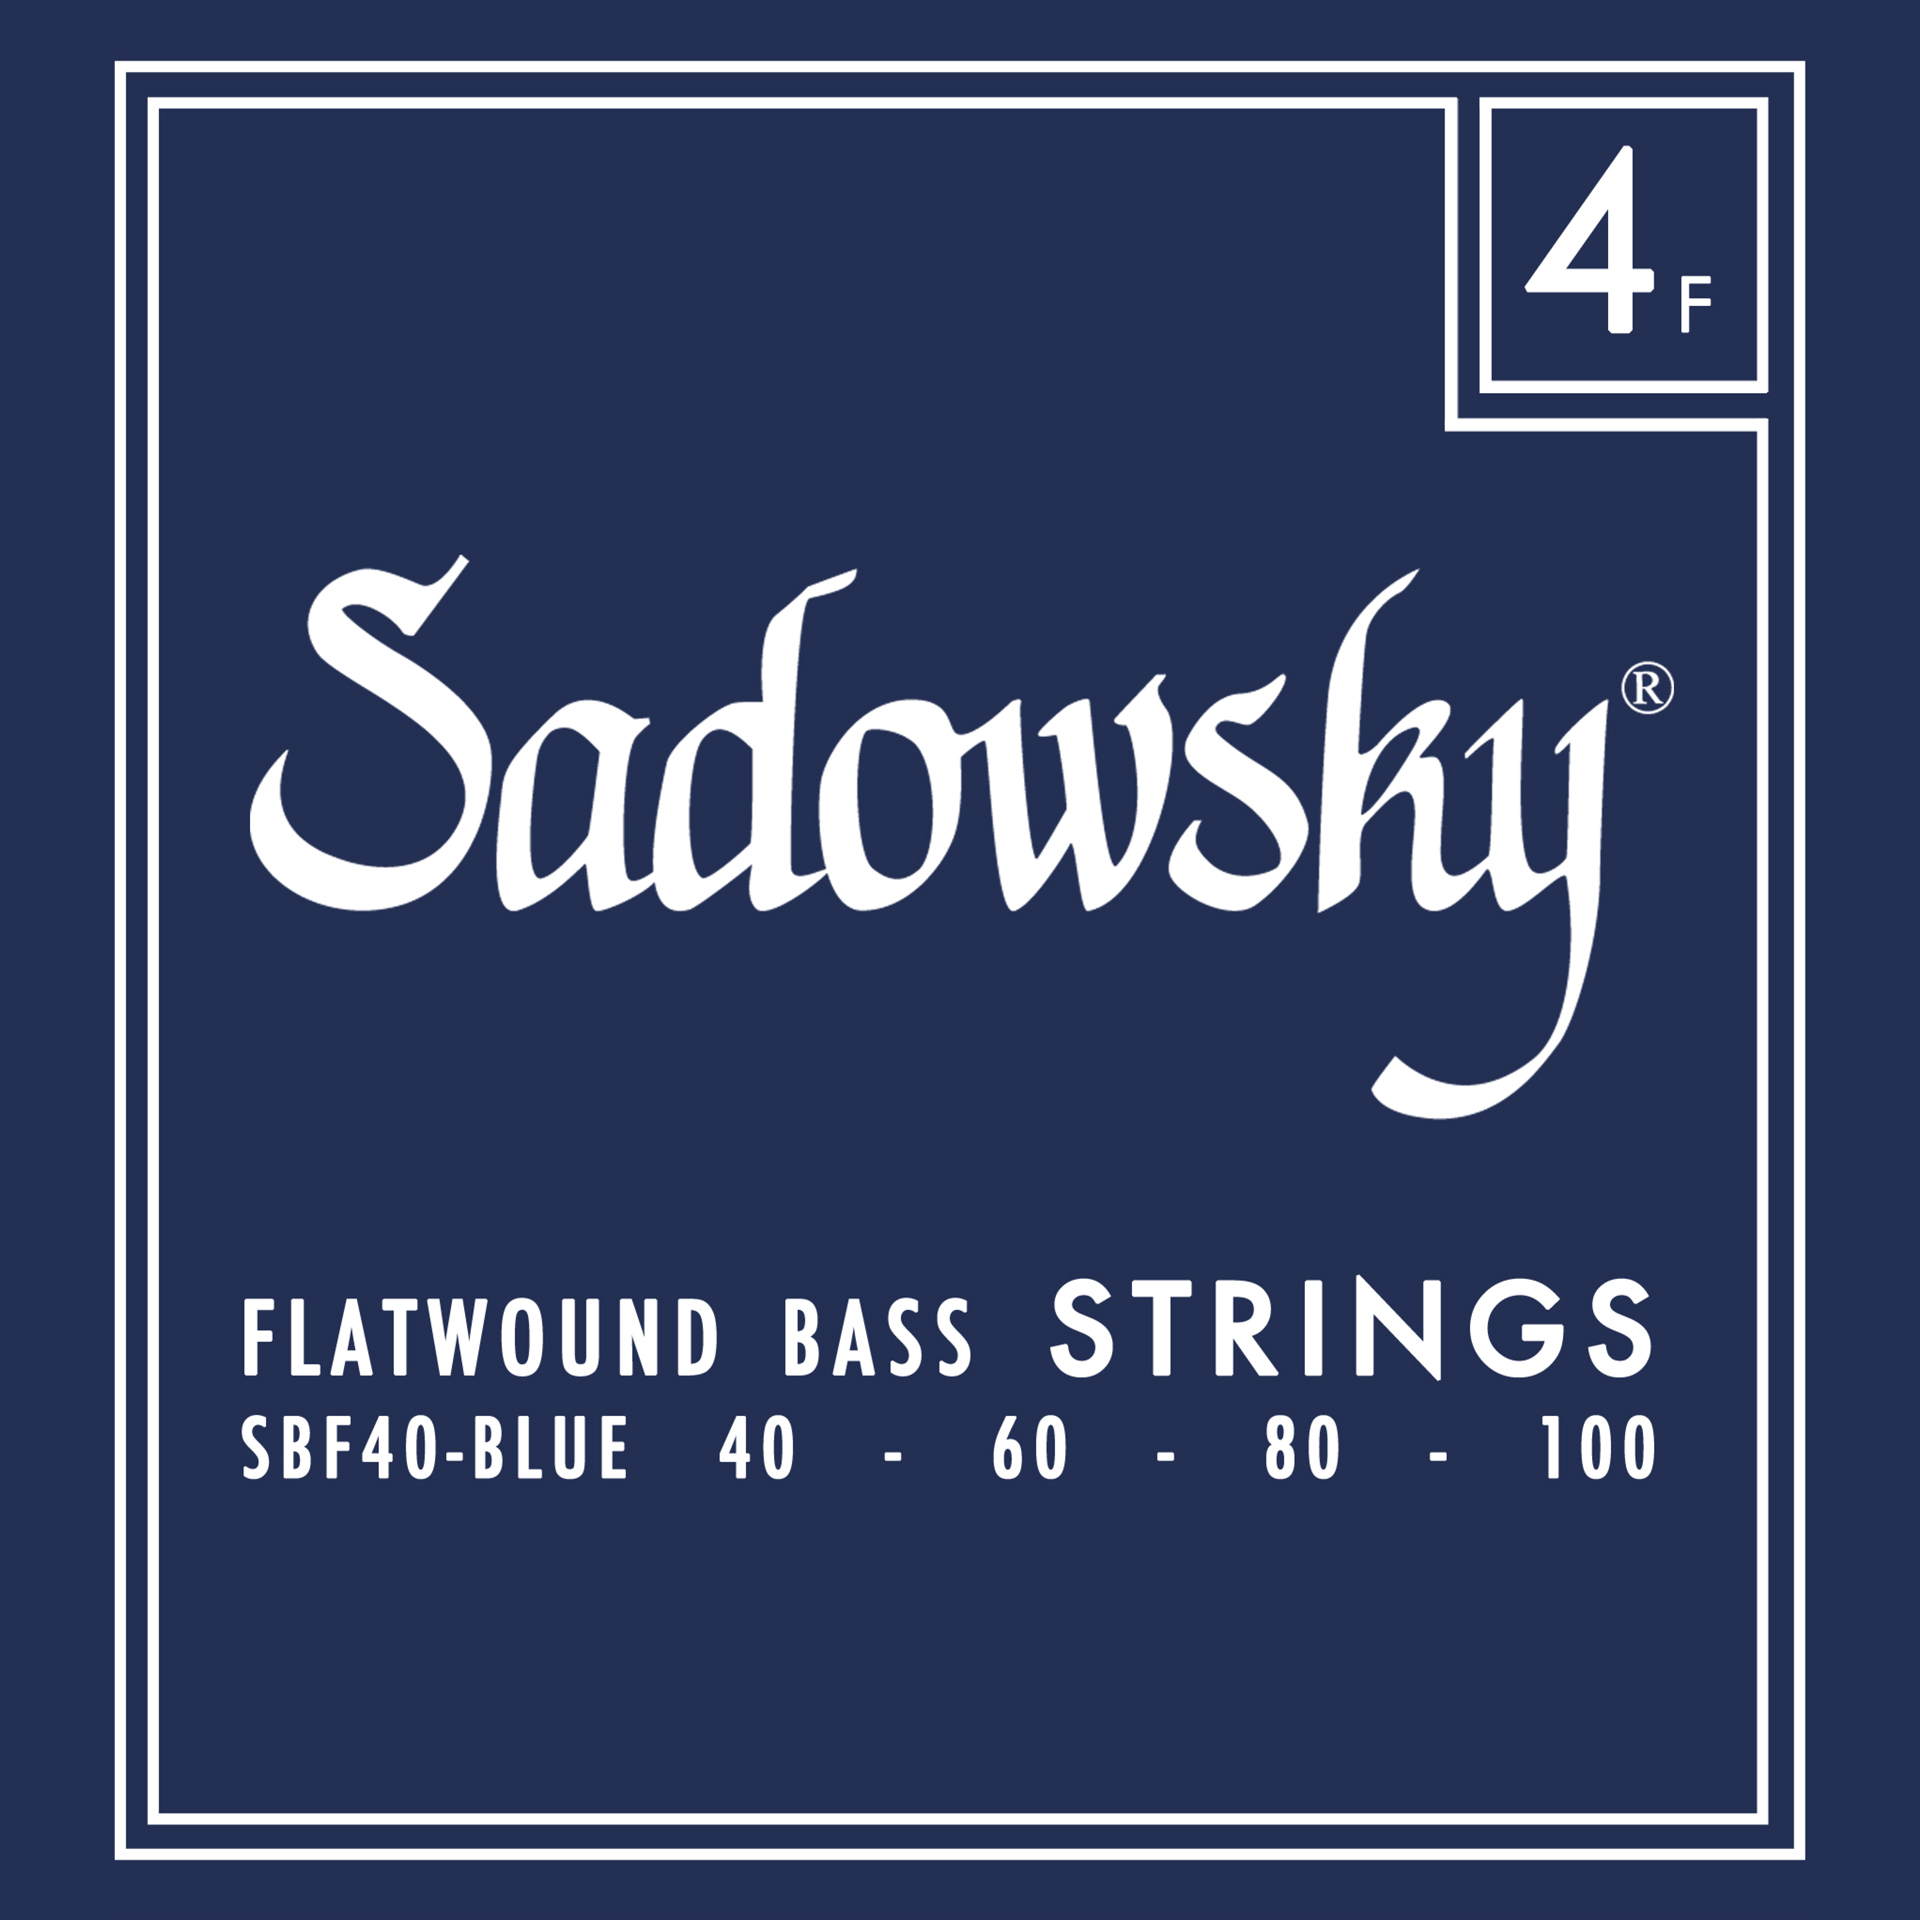 Sadowsky Blue Label Bass String Set, Stainless Steel, Flatwound - 4-String, 040-100